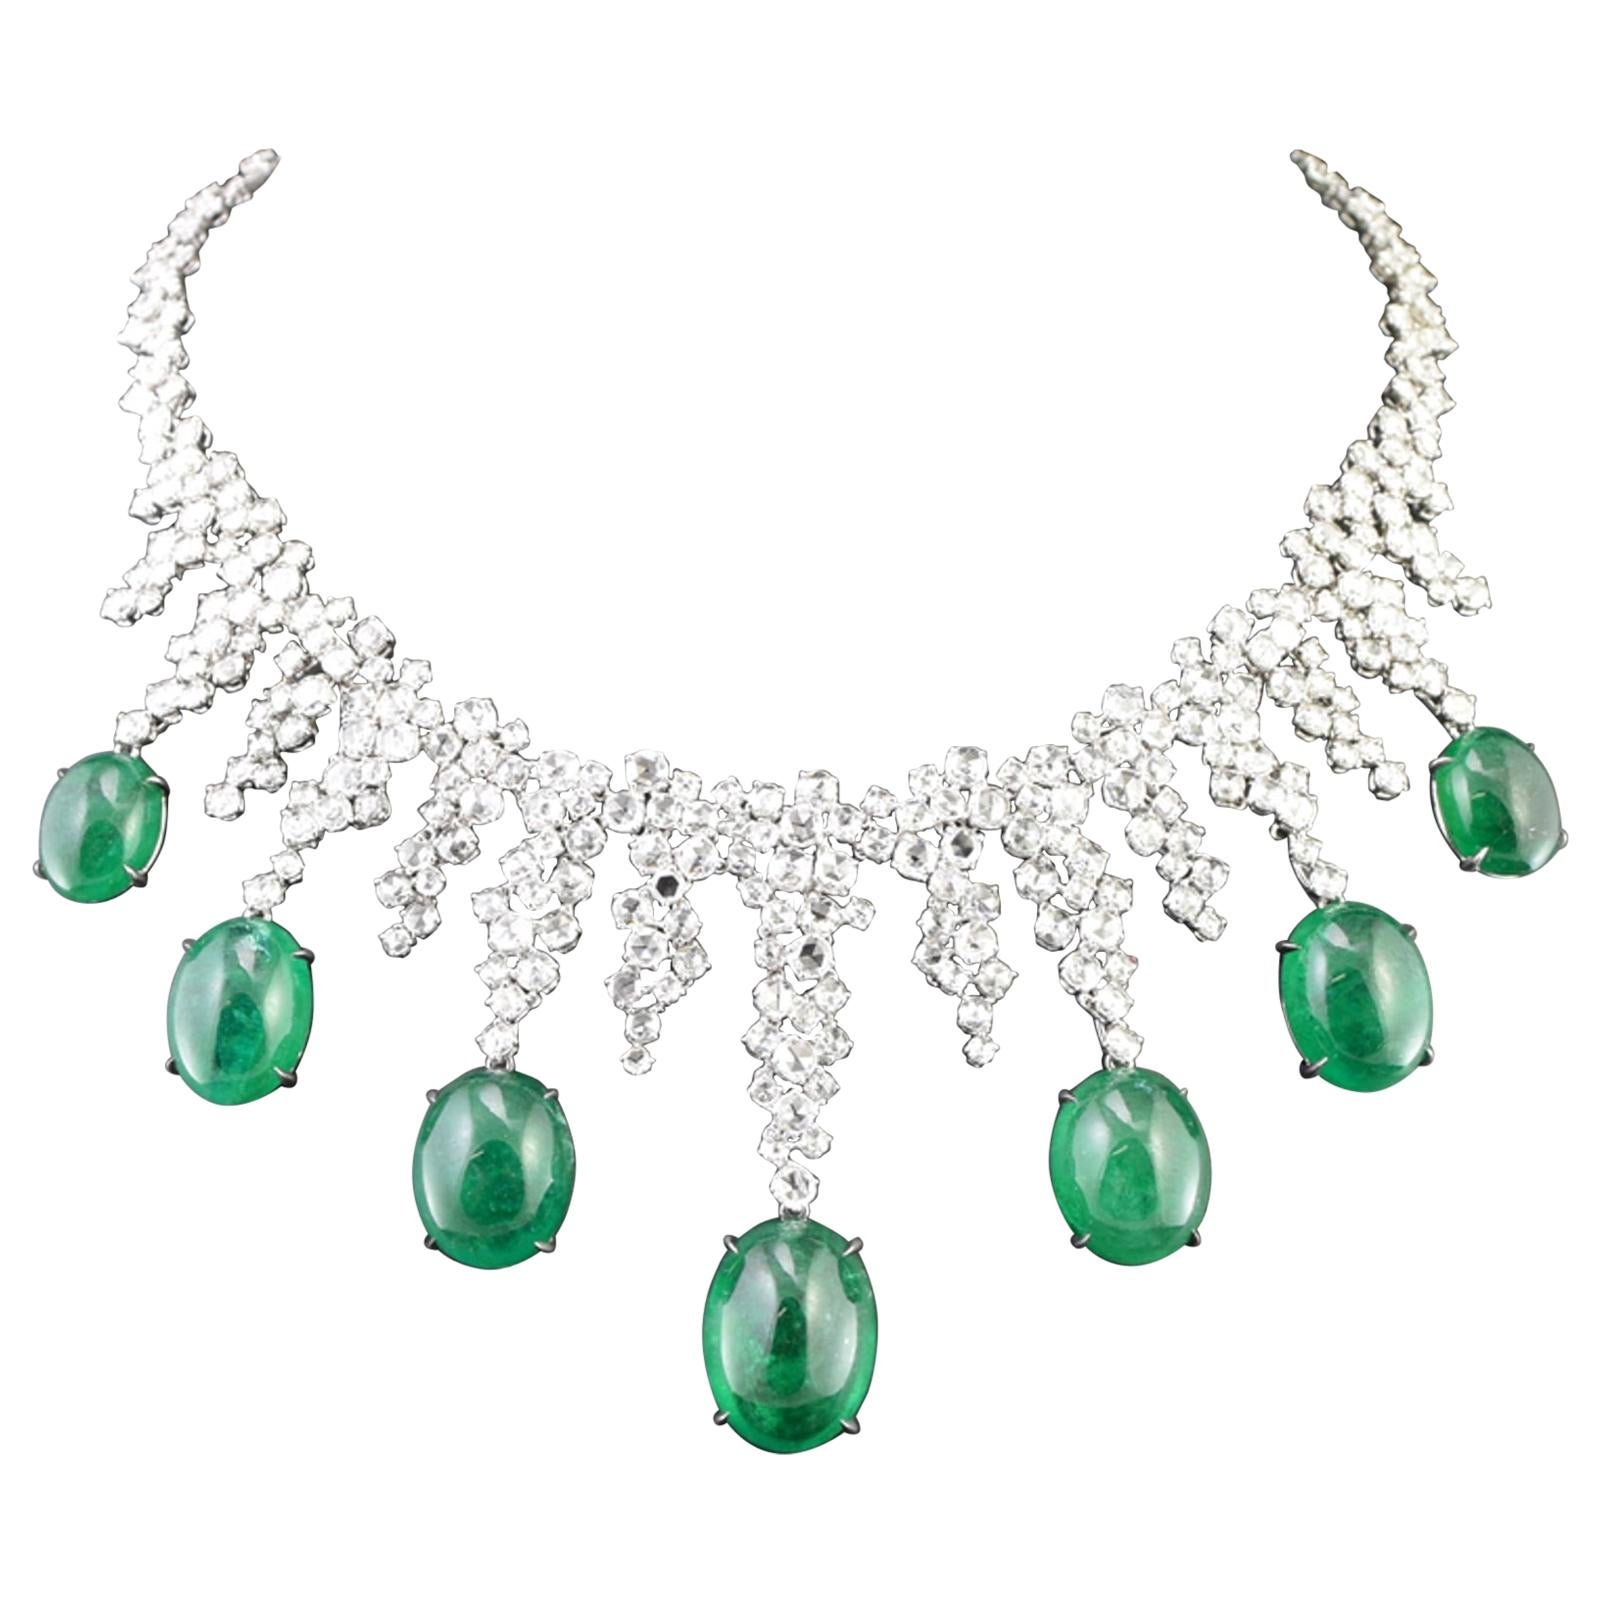 18 Karat White Gold Diamond and Cabochon Emerald "Icecicle" Necklace